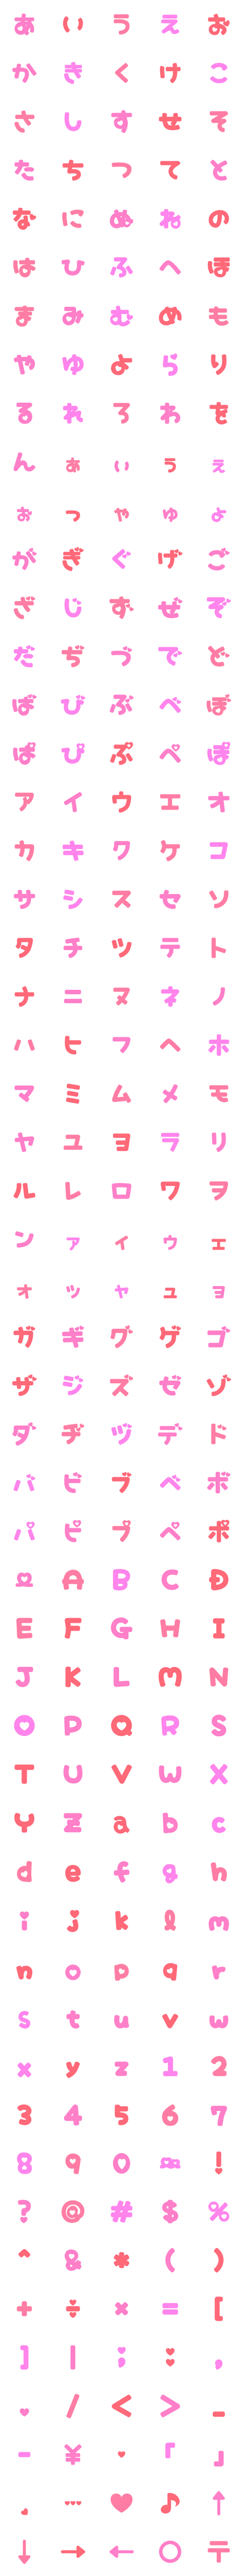 [LINE絵文字]ふぁんしーピンクはーとの画像一覧